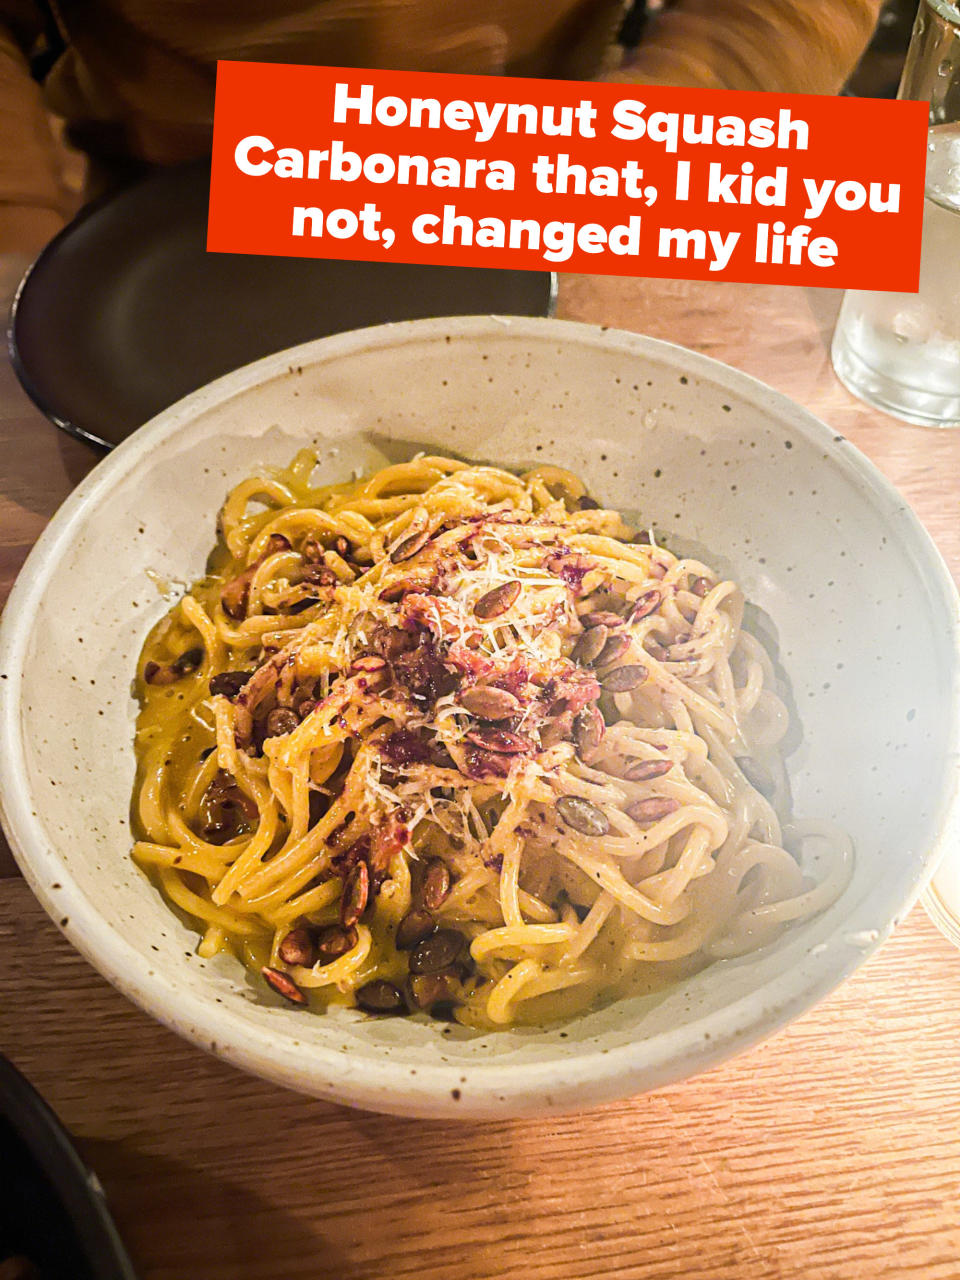 A bowl of carbonara with the text "Honeynut Squash Carbonara that, I kid you not, changed my life"